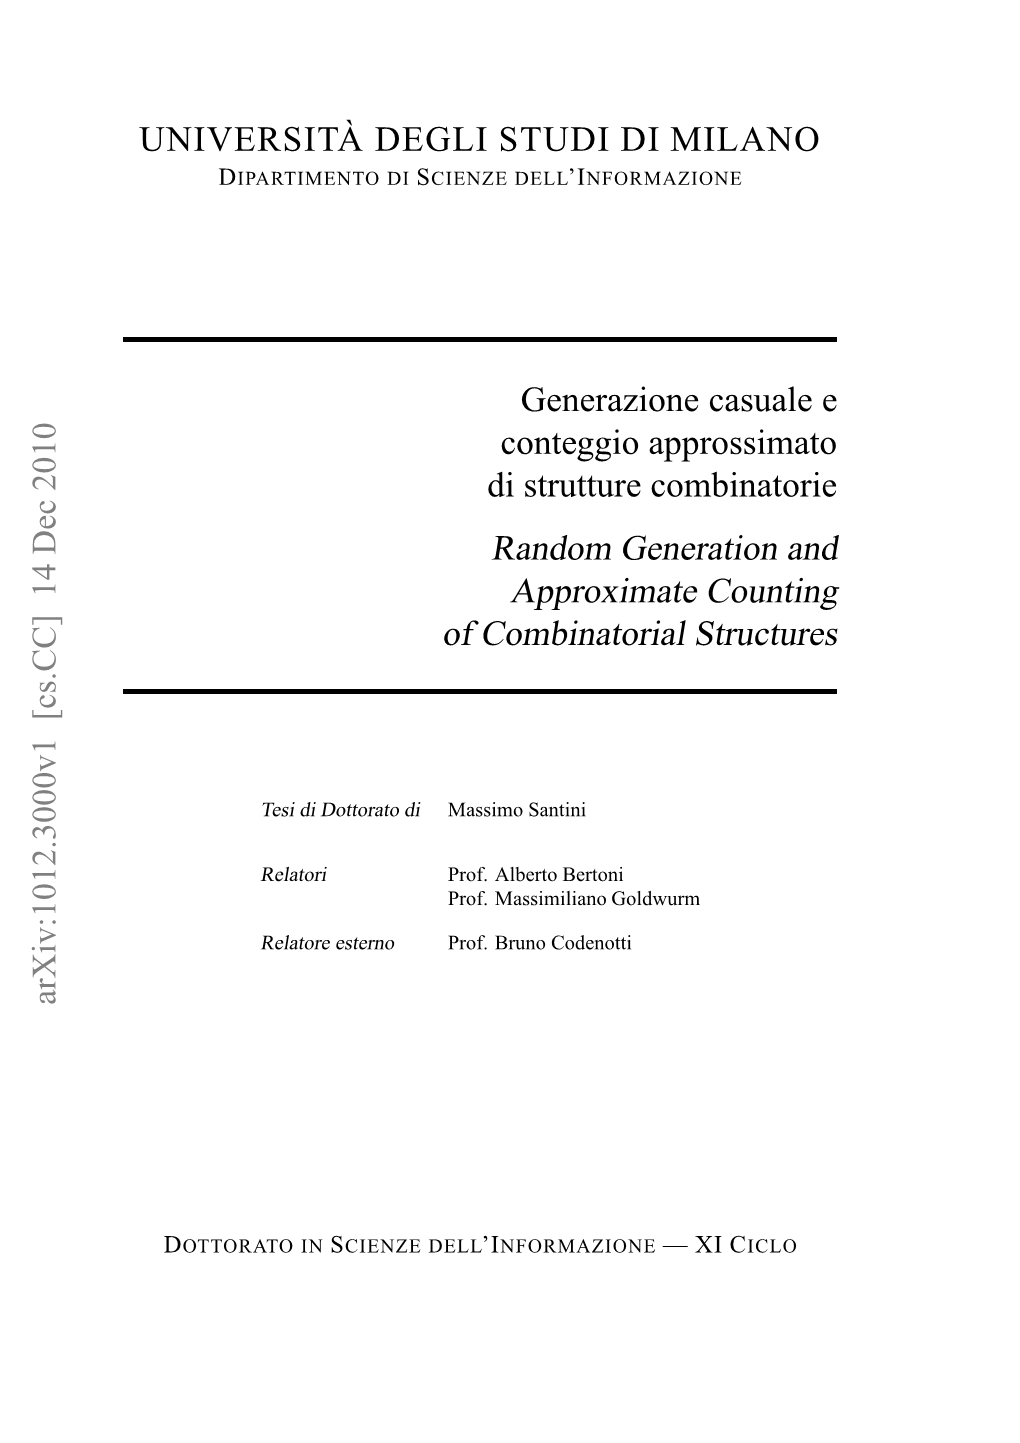 Random Generation and Approximate Counting of Combinatorial Structures